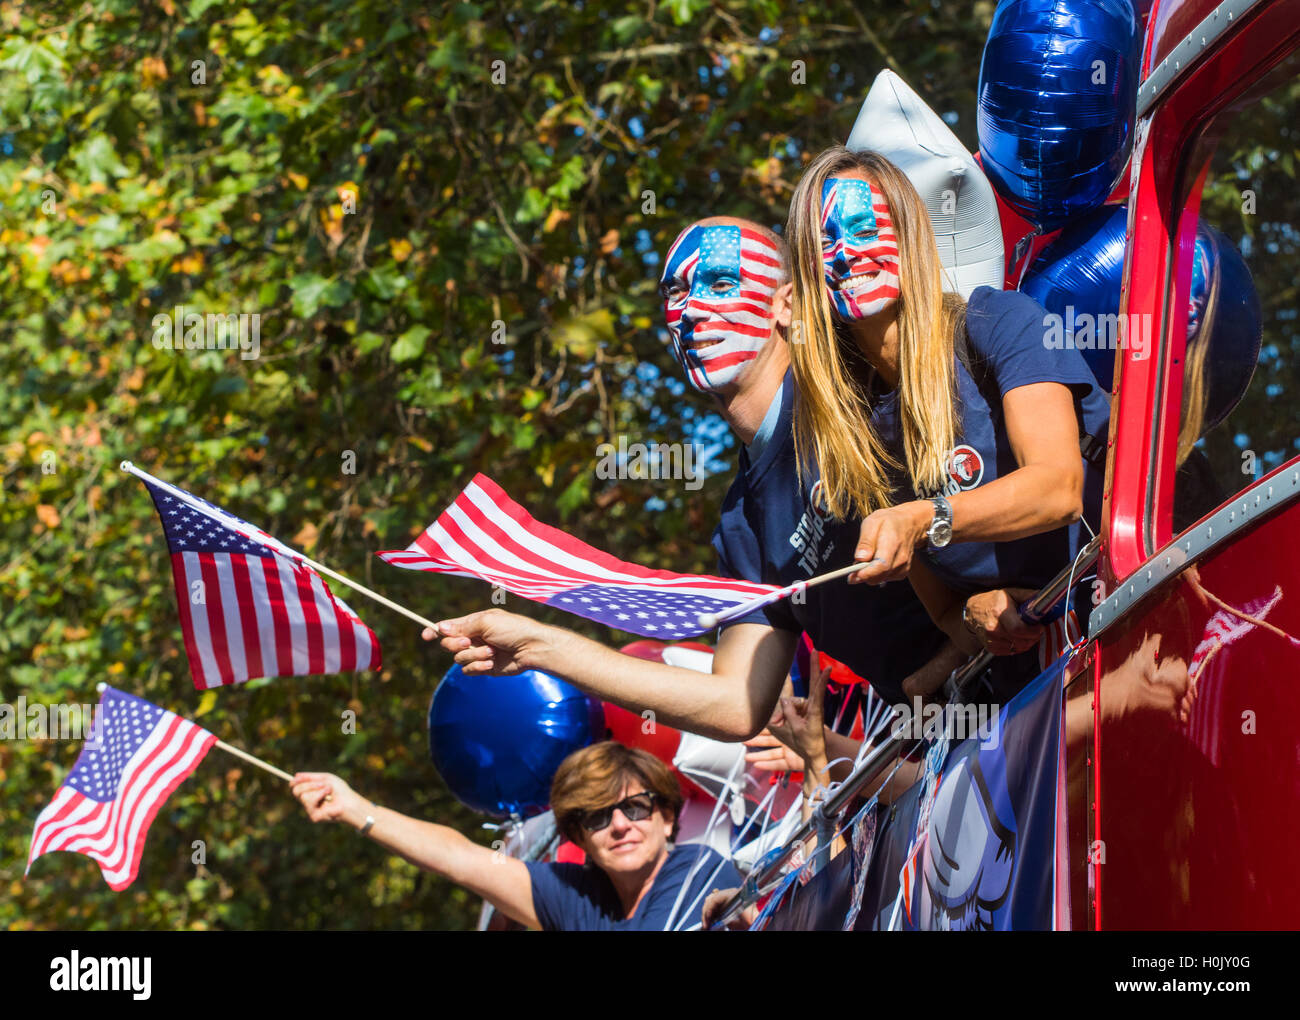 London, September 21st 2016. A "Stop Trump" open topped red London double-decker bus tours central London in a bid to encourage US expats to vote for Clinton. XXXX. Credit:  Paul Davey/Alamy Live News Stock Photo